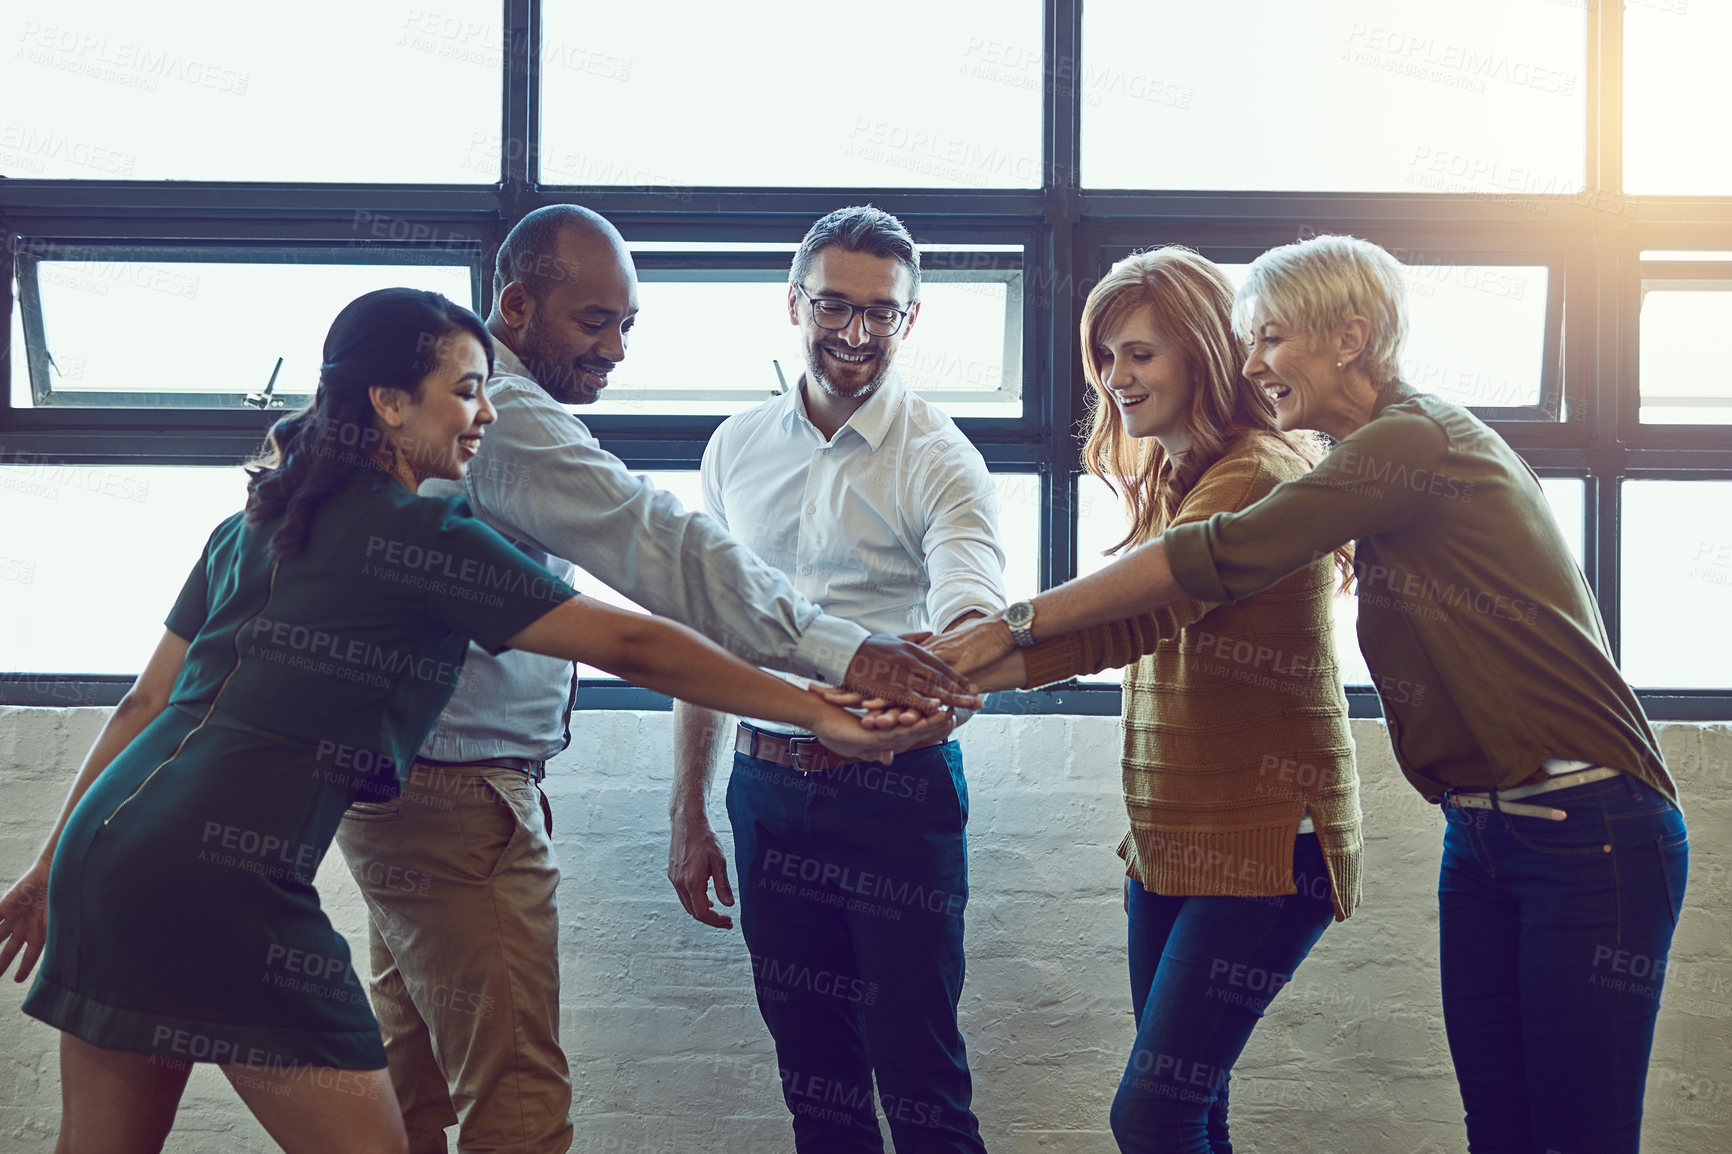 Buy stock photo Shot of a group of colleagues joining their hands in solidarity at work